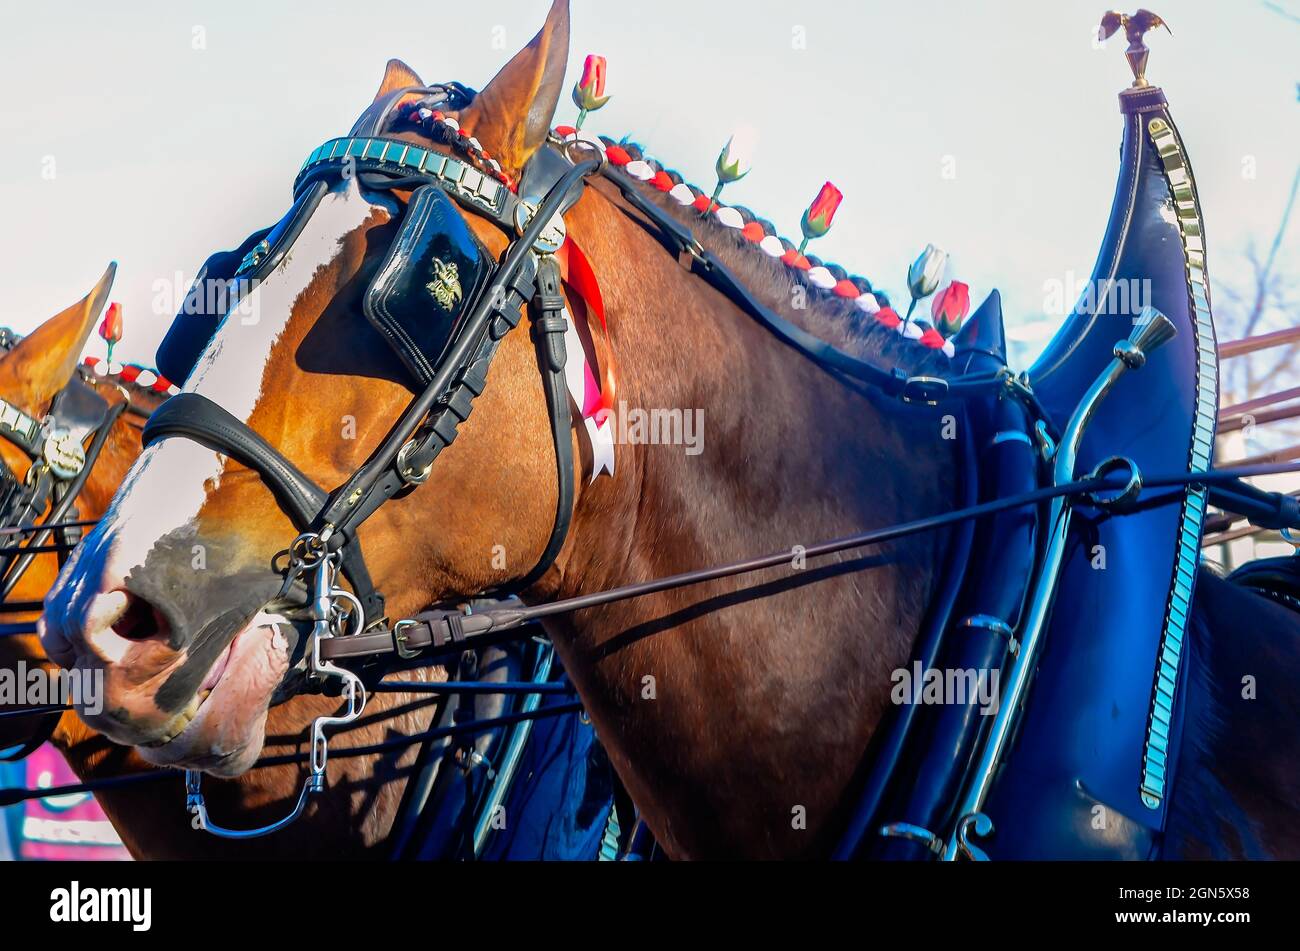 A horse with blinders appears to smile during the Joe Cain Day Mardi Gras parade, Feb. 7, 2016, in Mobile, Alabama. Stock Photo